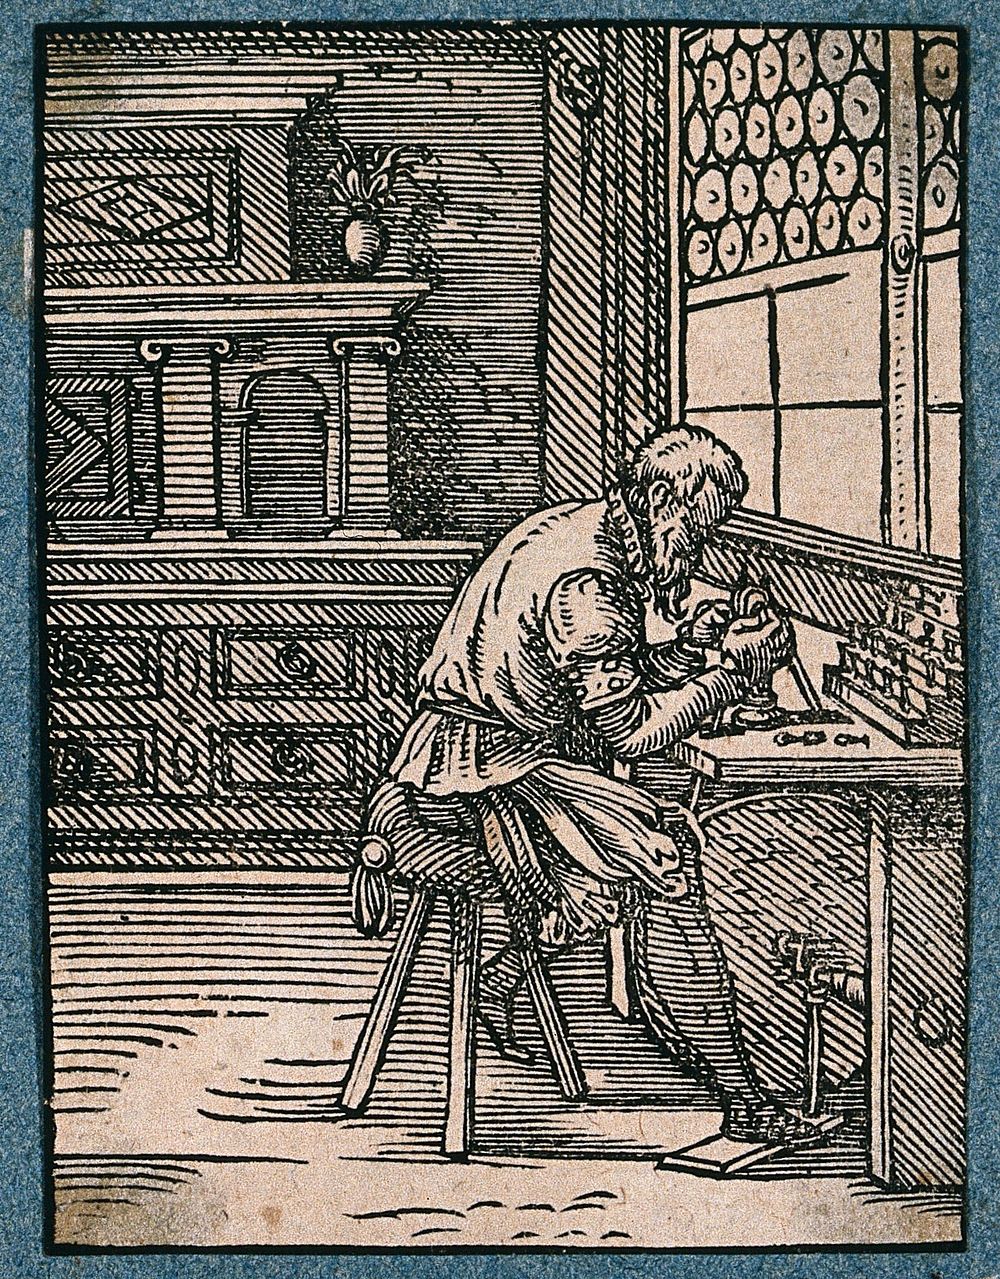 A man cutting gems using a treadle at his bench before a large window. Woodcut by J. Amman.